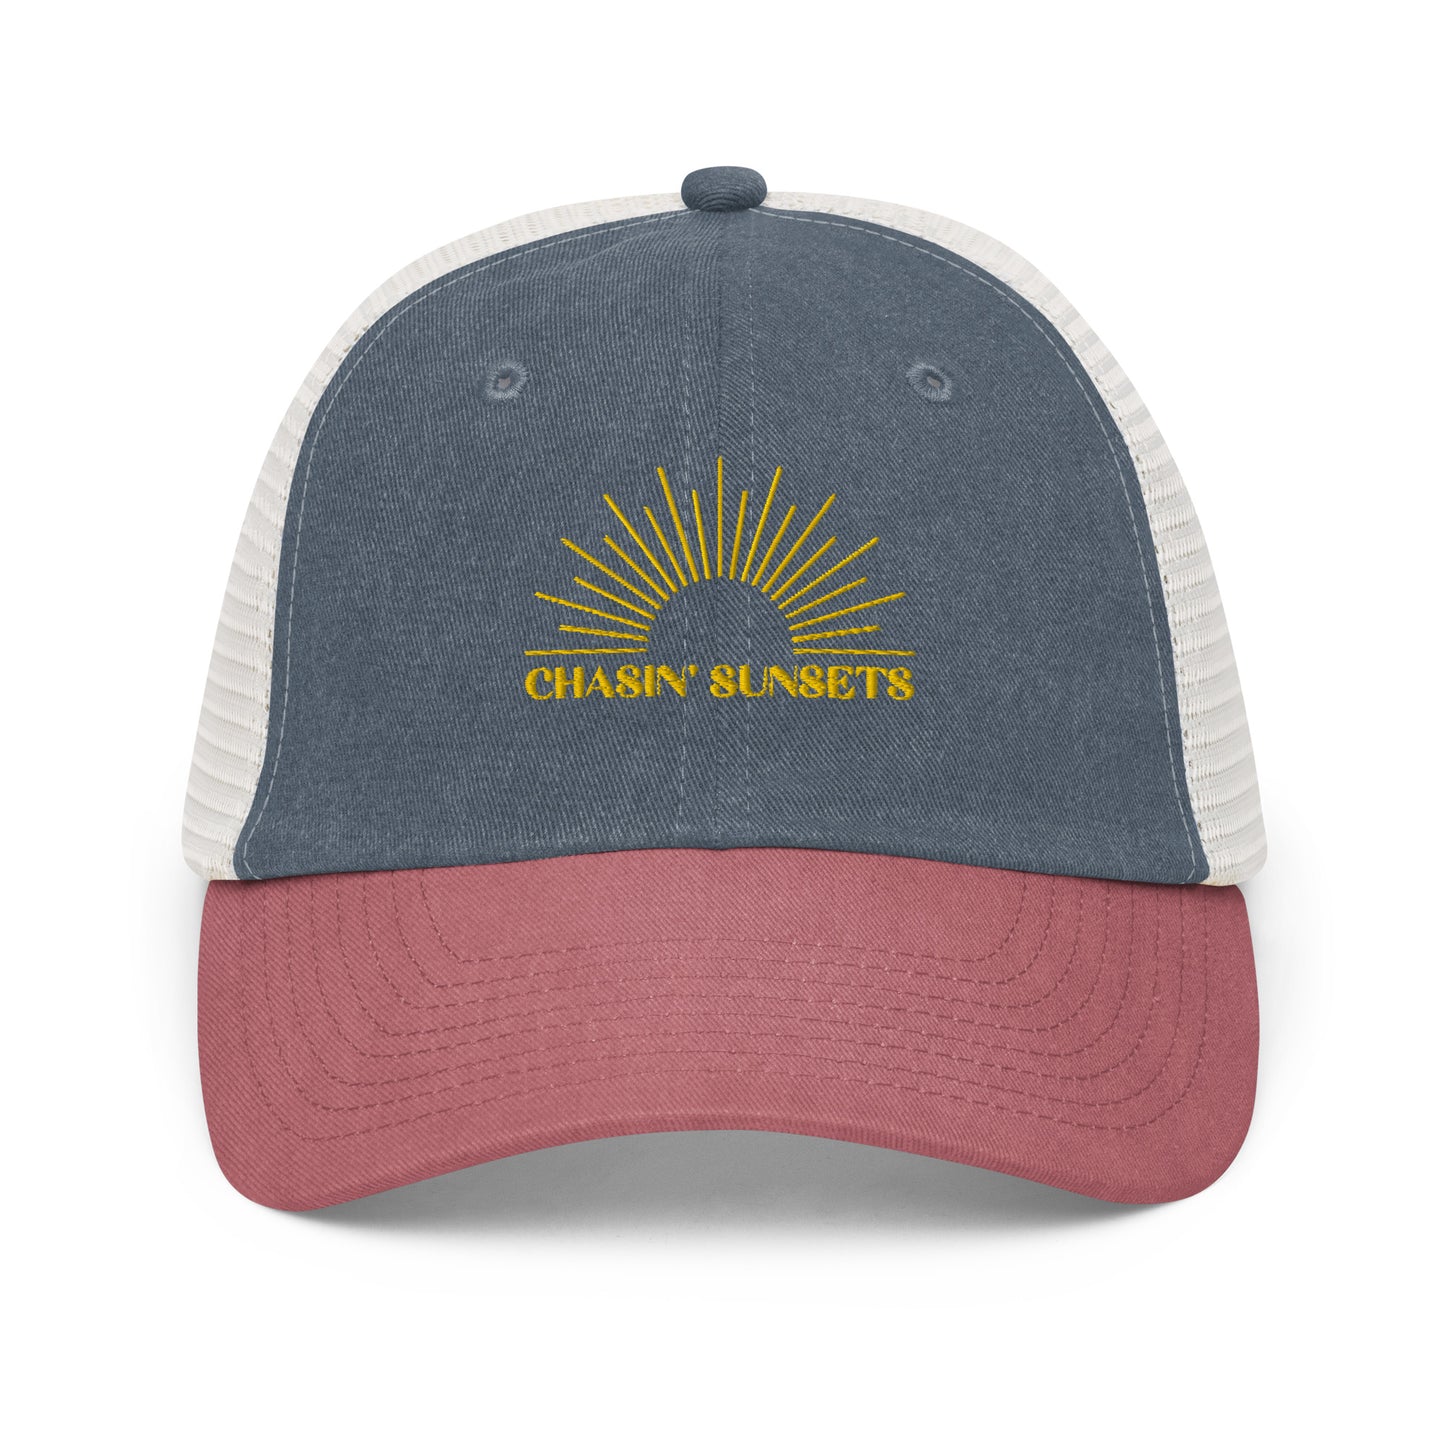 Chasing Sunsets Mesh Hat - Pink